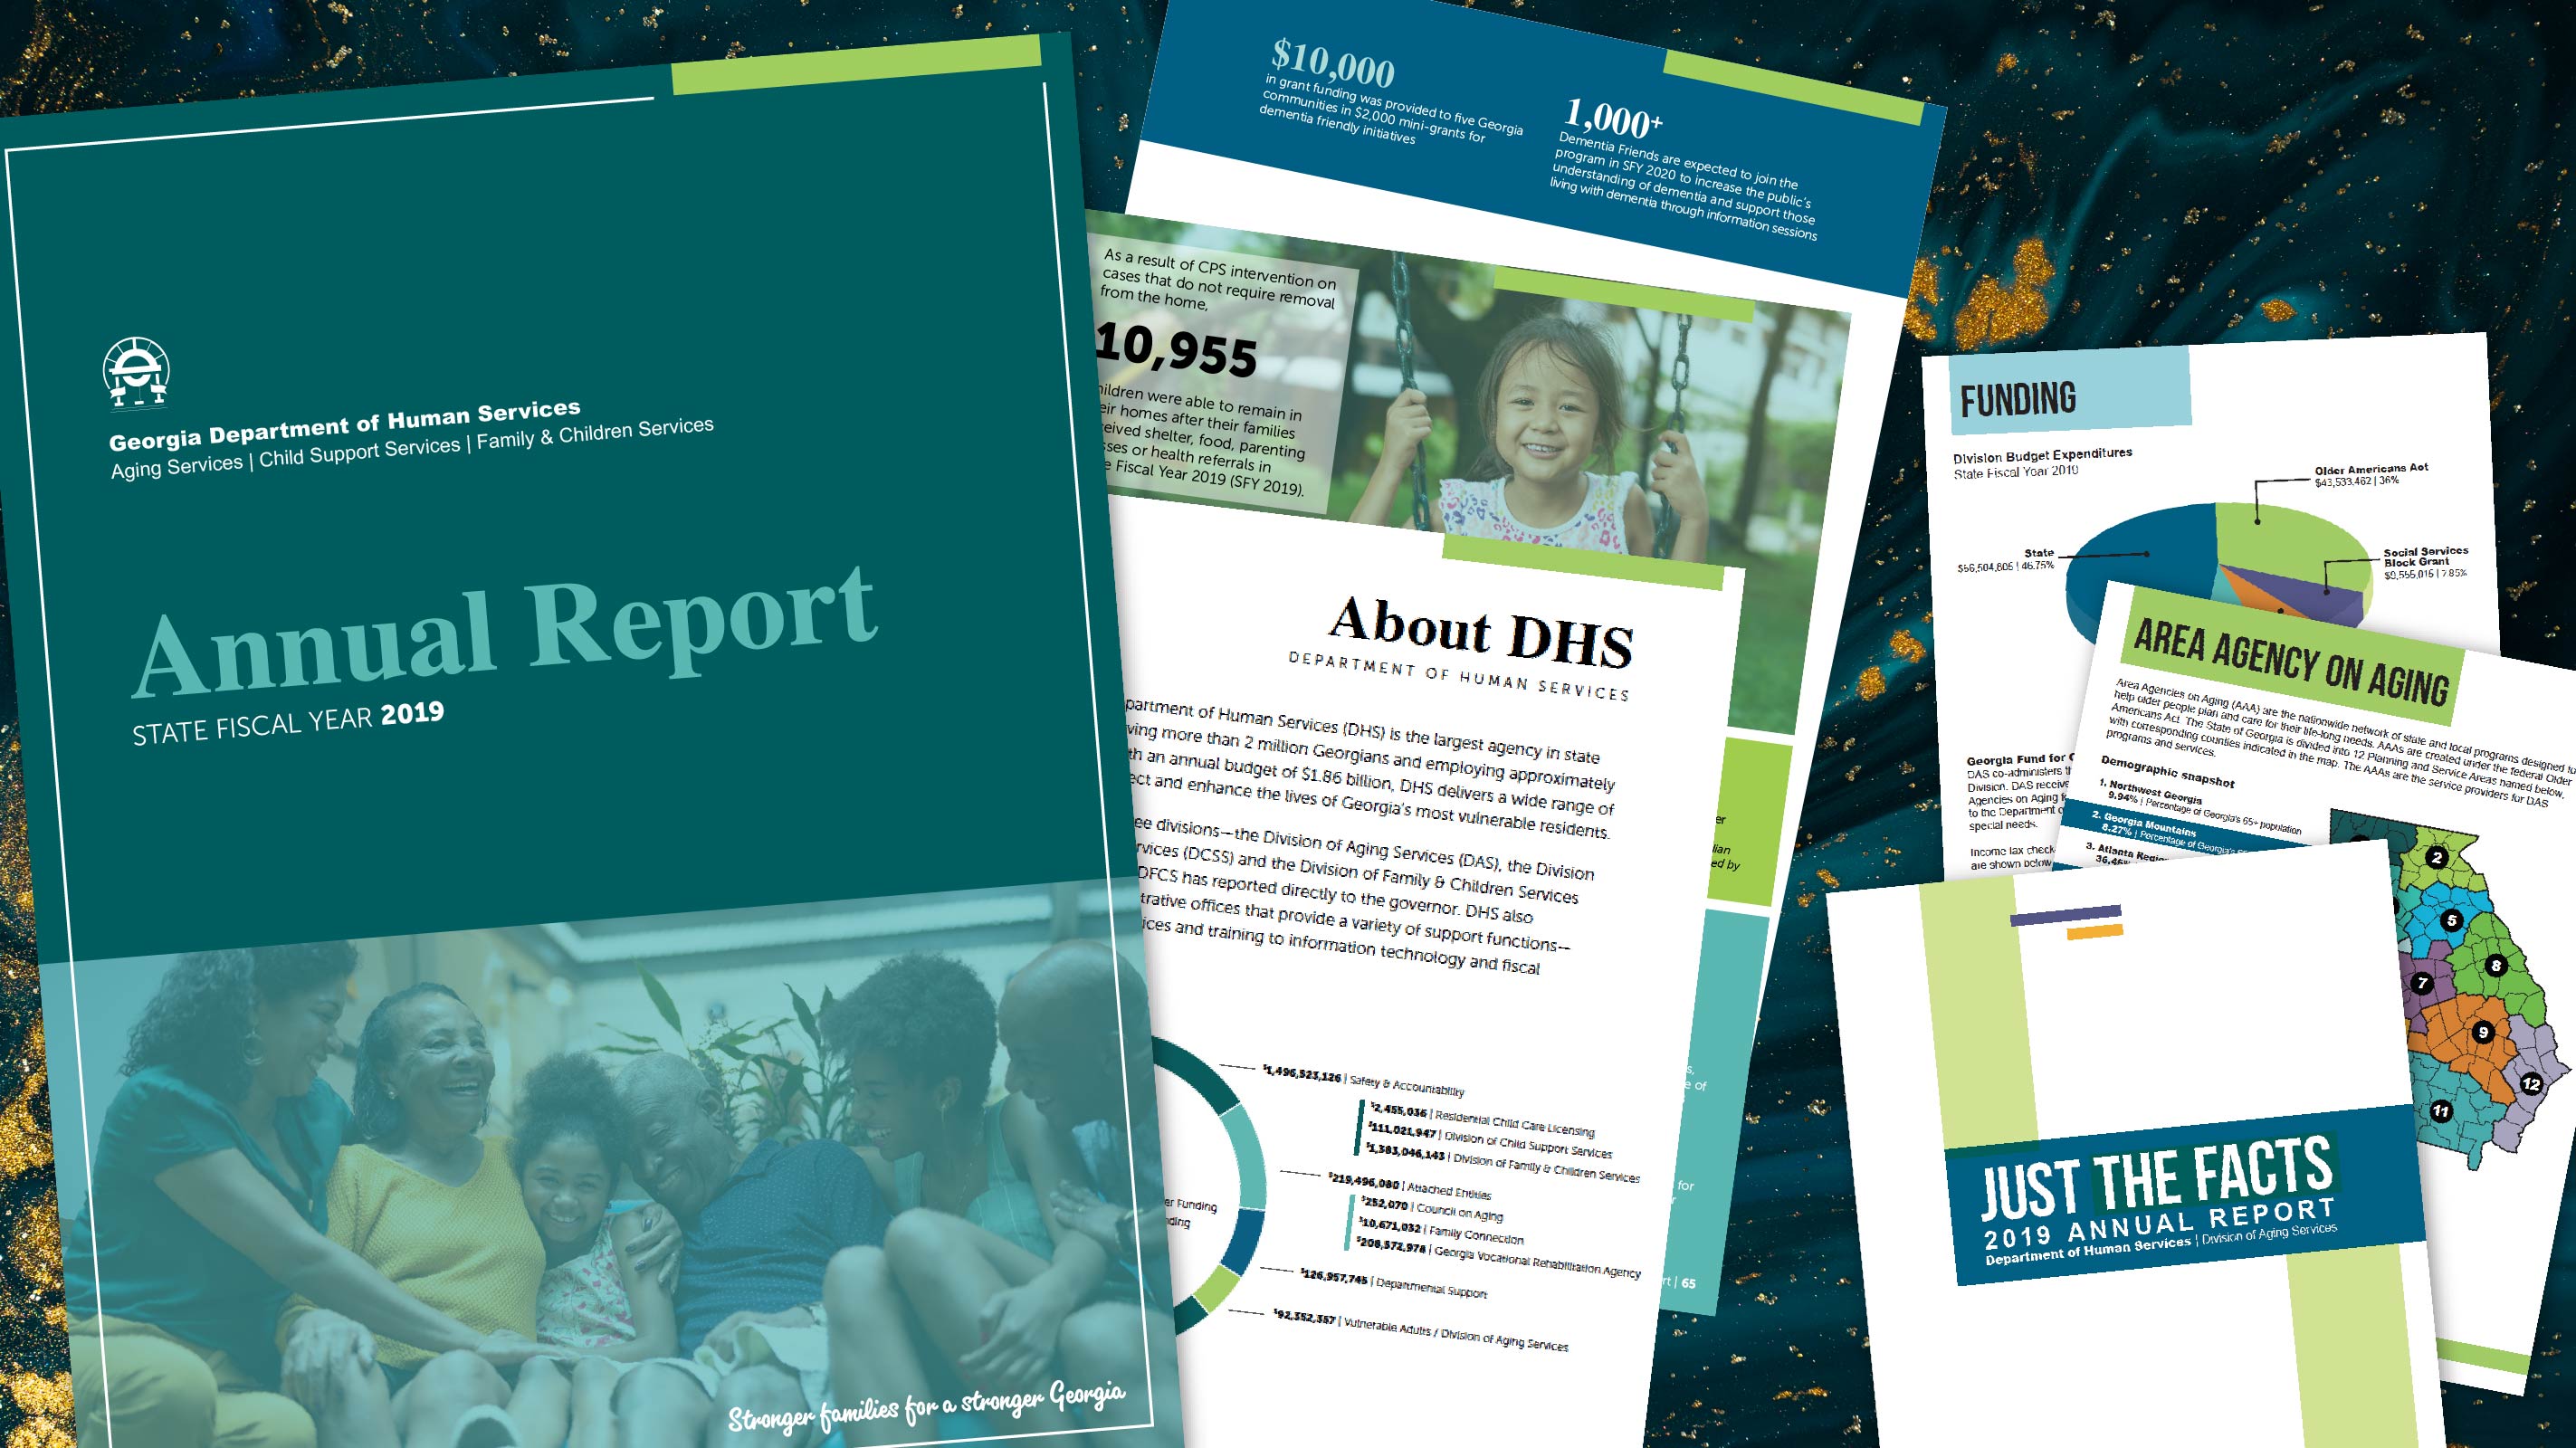 2019 Annual Report & Just The Facts